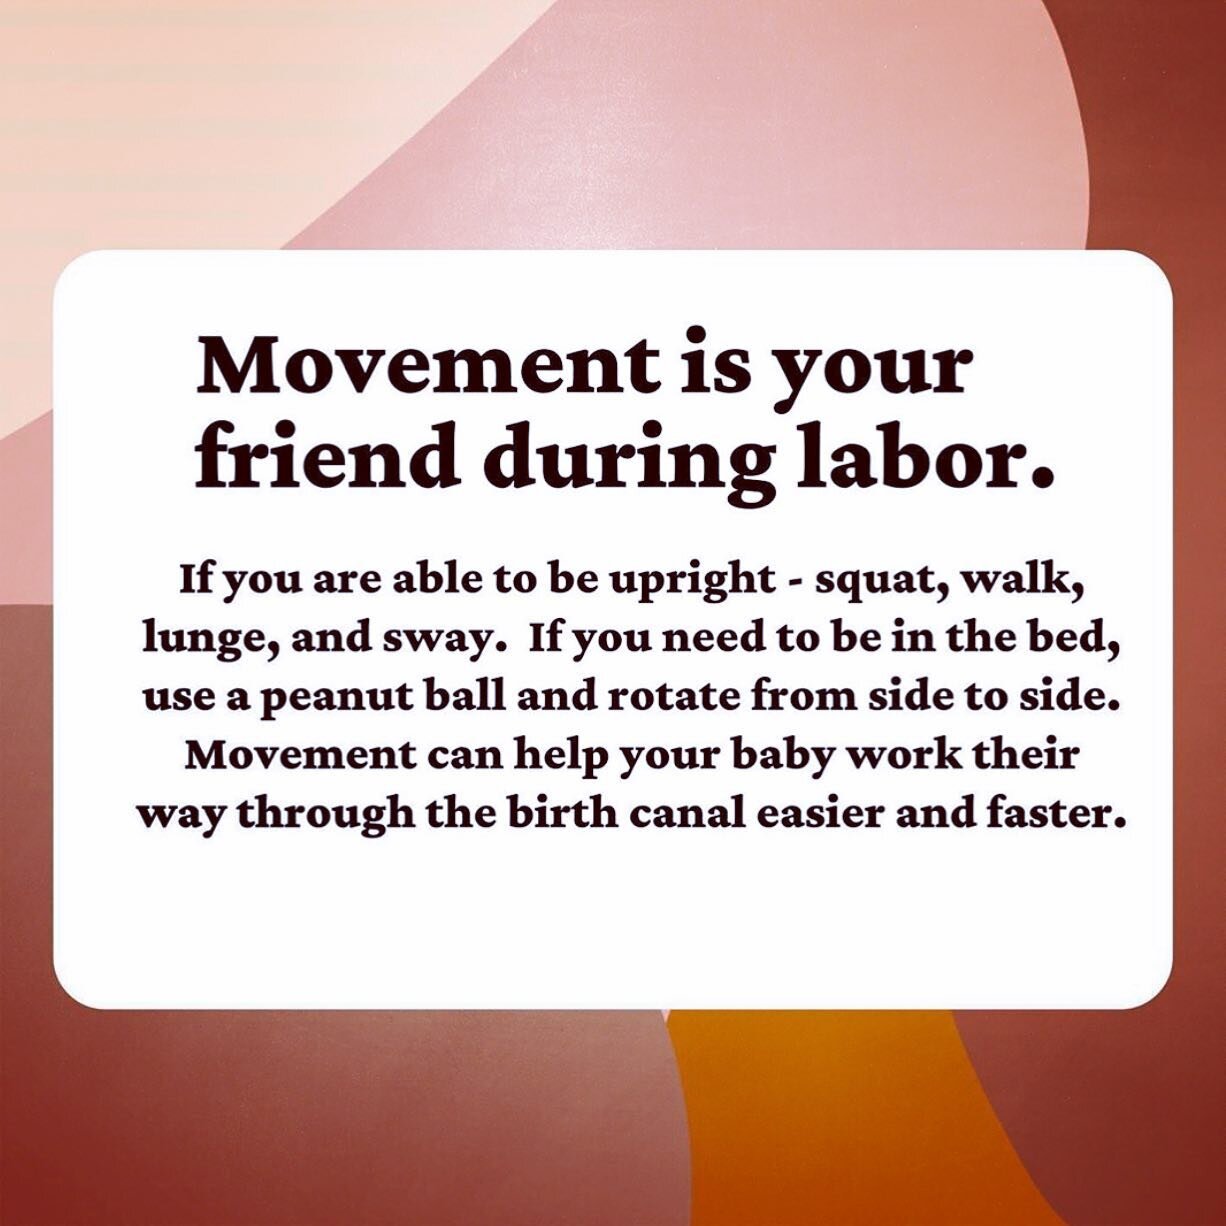 miles circuit / supported squats / dancing the baby down / lift &amp; tuck / curb walking / figure 8s / stairs / shaking the apples

doula friends - what are your favorite ways to use movement in labor? 

Image via @birthbecomes